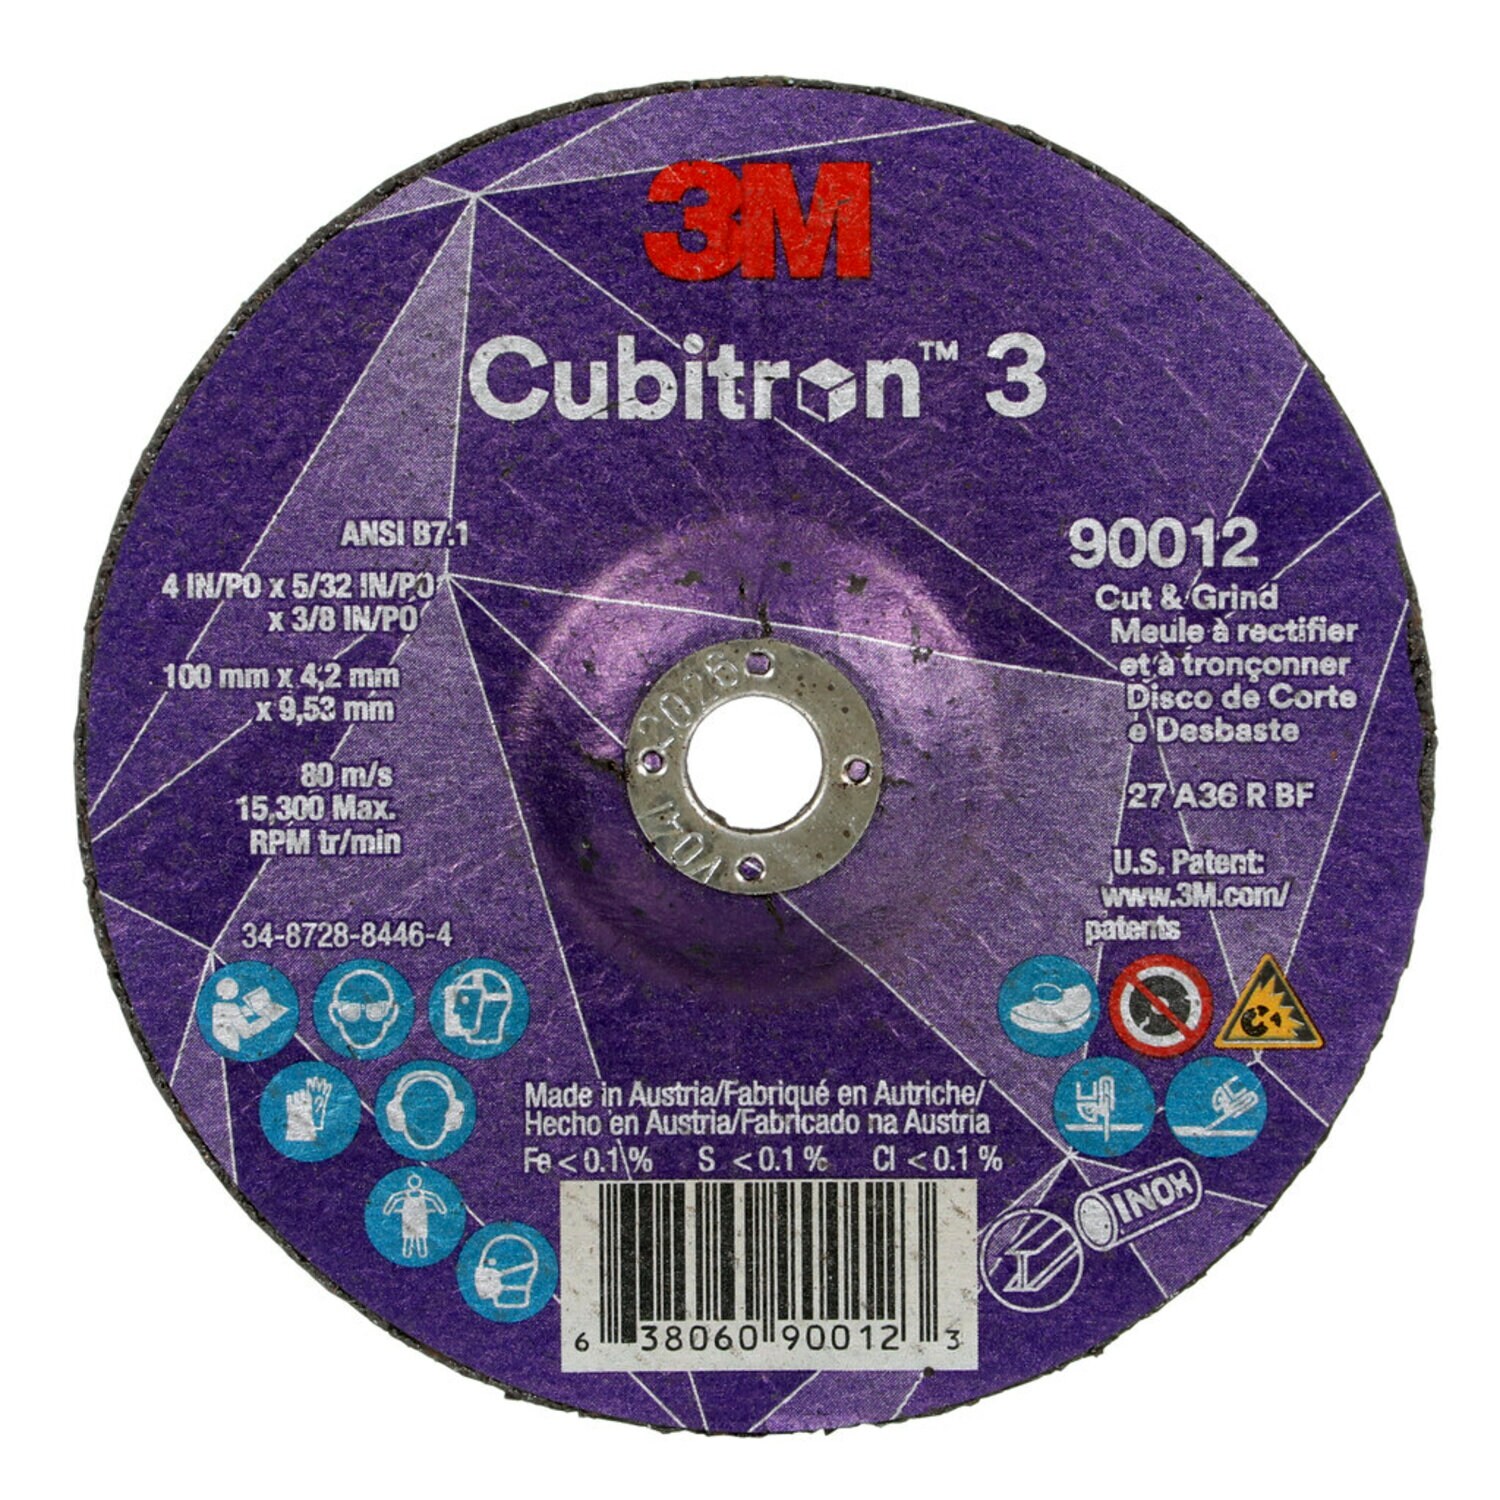 7100305152 - 3M Cubitron 3 Cut and Grind Wheel, 90012, 36+, T27, 4 in x 5/32 in x
3/8 in (100 x 4.2 x 9.53 mm), ANSI, 10/Pack, 20 ea/Case